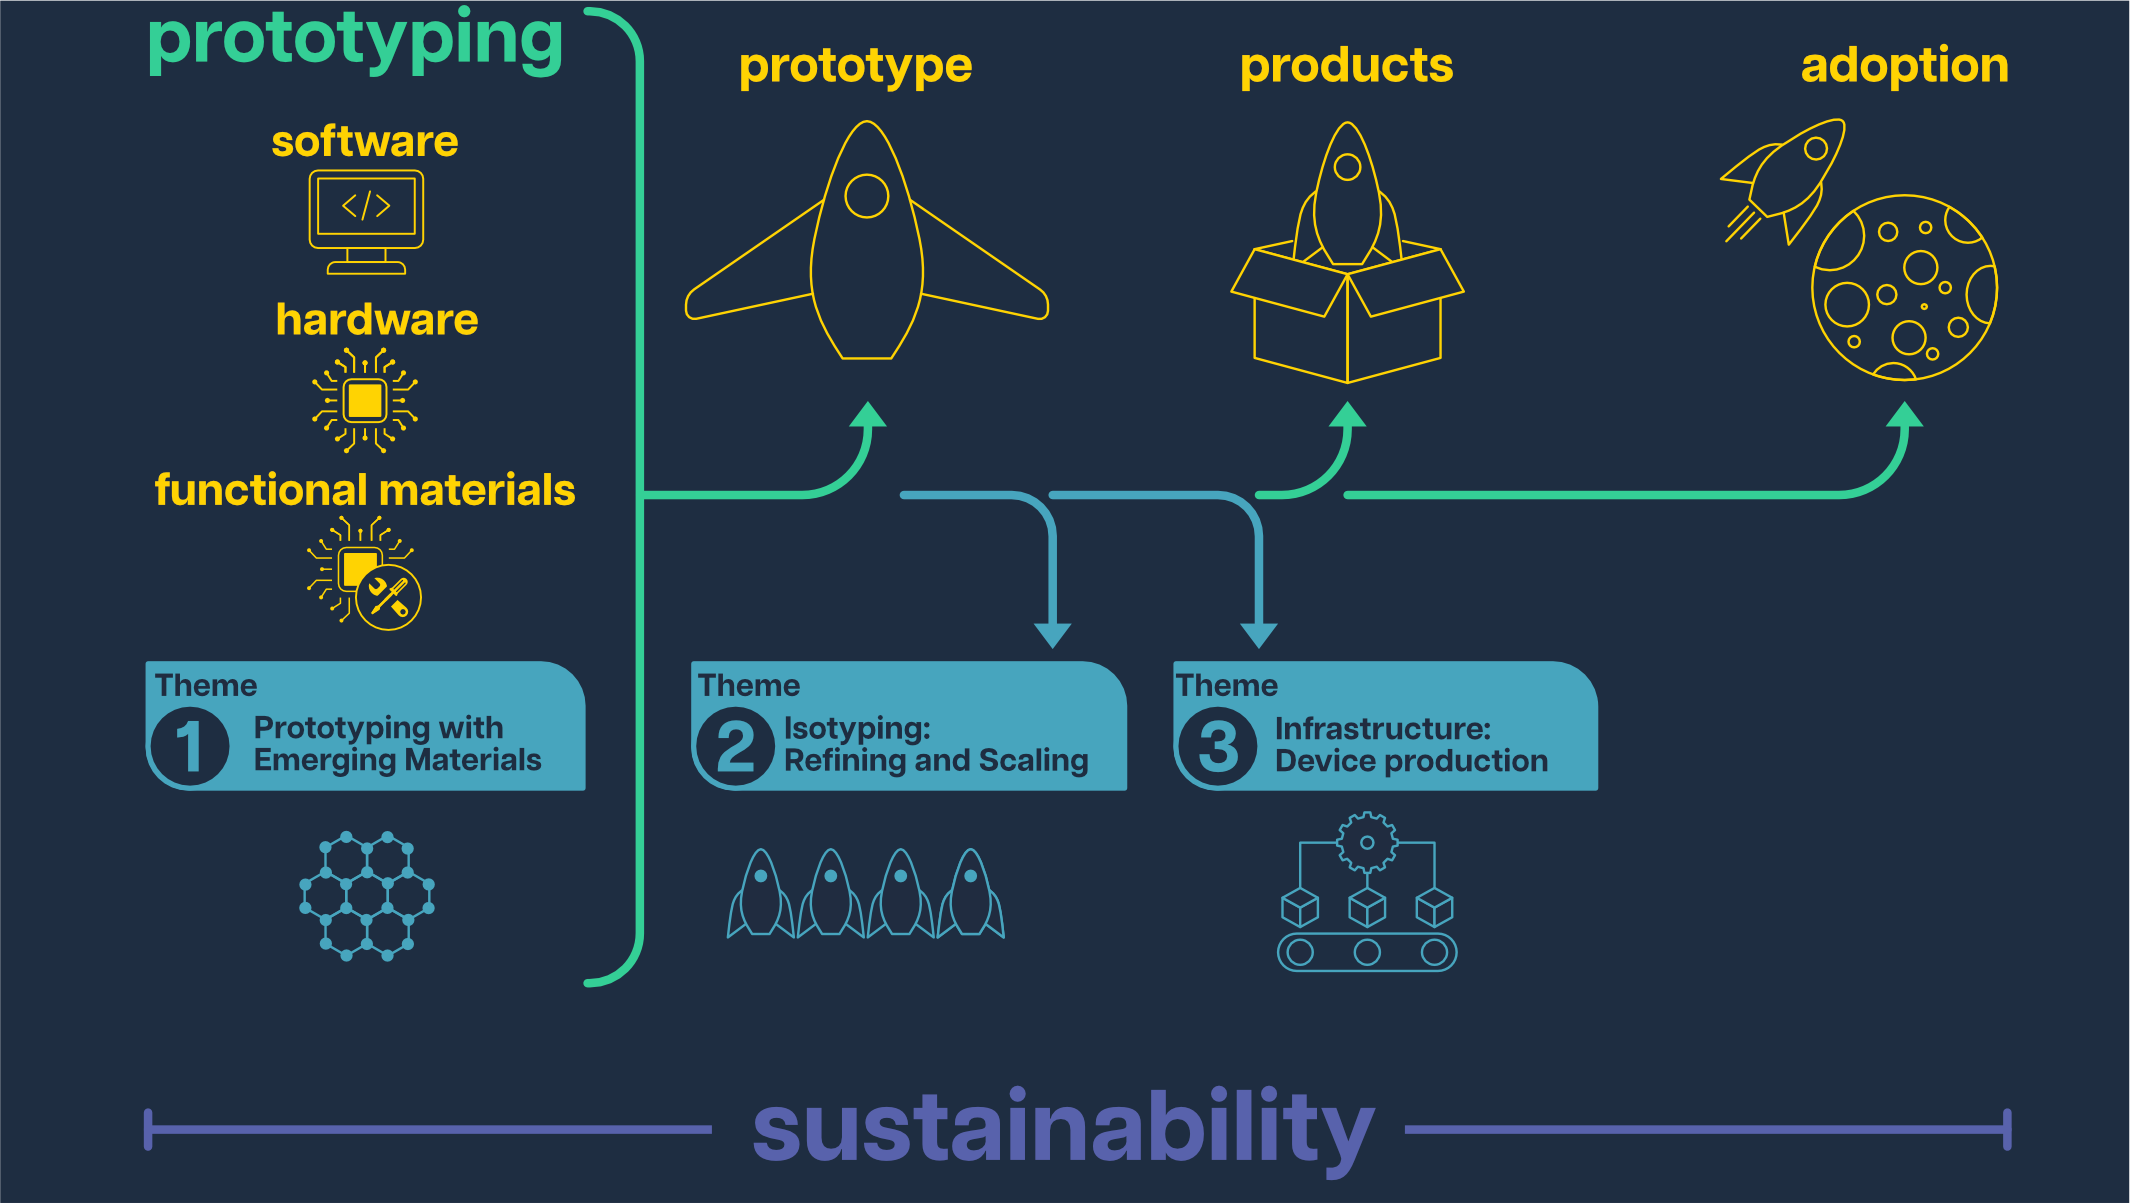 An infographic with a navy background. On the left from top to bottom is the text 'Prototyping', followed by three sub-categories in yellow: software, hardware, and functional materials with icons representing them. Below this is the header 'Theme 1: Prototyping with Emerging Materials' and a round, molecular type symbol representing it. Along the top of the infographic are three rockets in yellow. The first has a poor design and is labelled 'prototype'. Next is a rocket above a box labelled 'products, and finally a rocket flying over the moon labelled 'adoption'. Arrows move from left to right indicating development of the rockets. Below these images is the header 'Theme 2: Isotyping: Refining and Scaling' symbolised by a line of small blue rockets' and the header 'Theme 3: Infrastructure: device production' symbolised by a production line. Running along the bottom of the infographic is the text 'sustainability' which spans all activities.